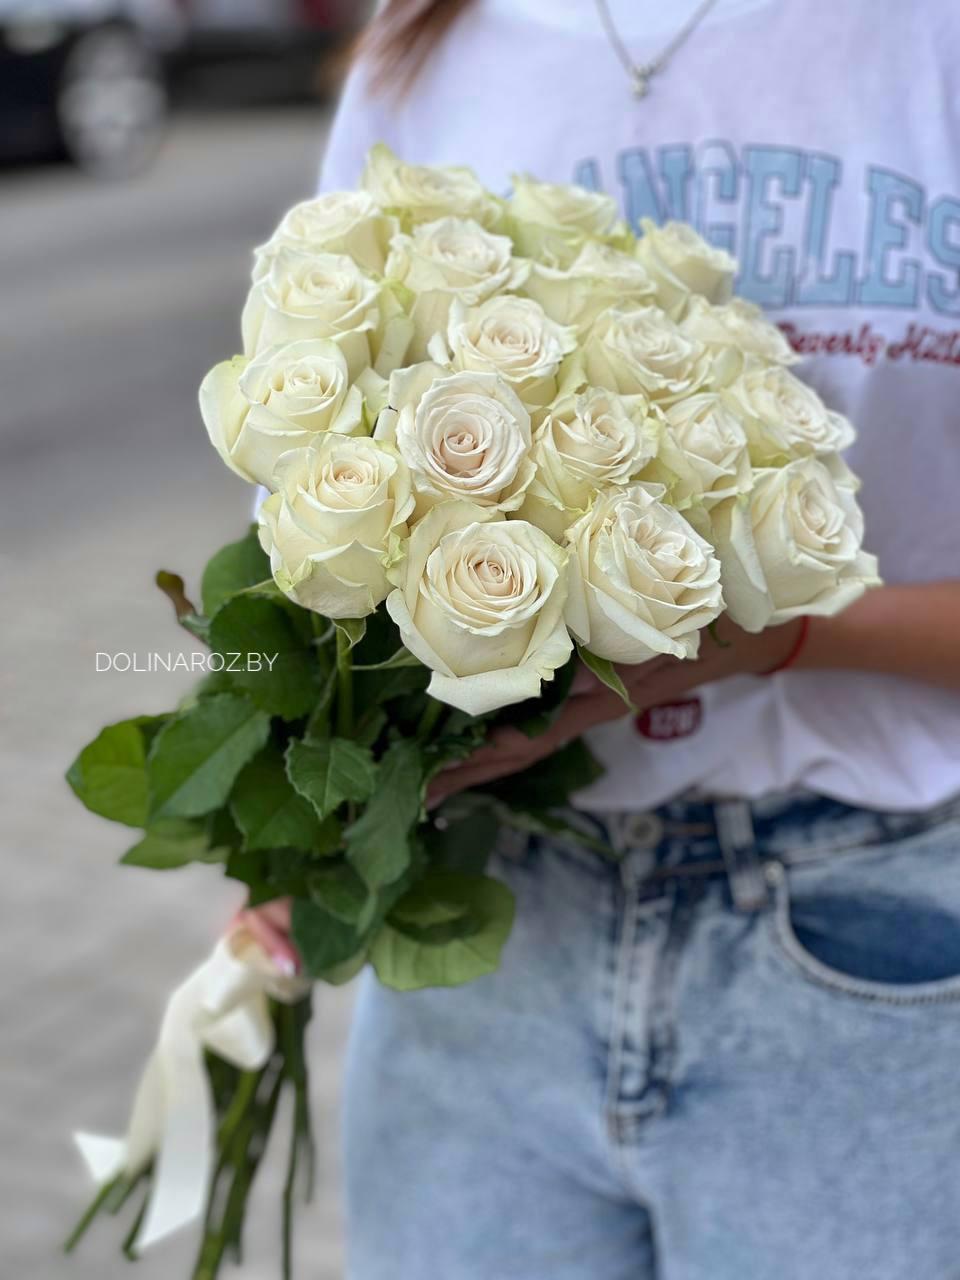 Bouquet of roses "White nights"